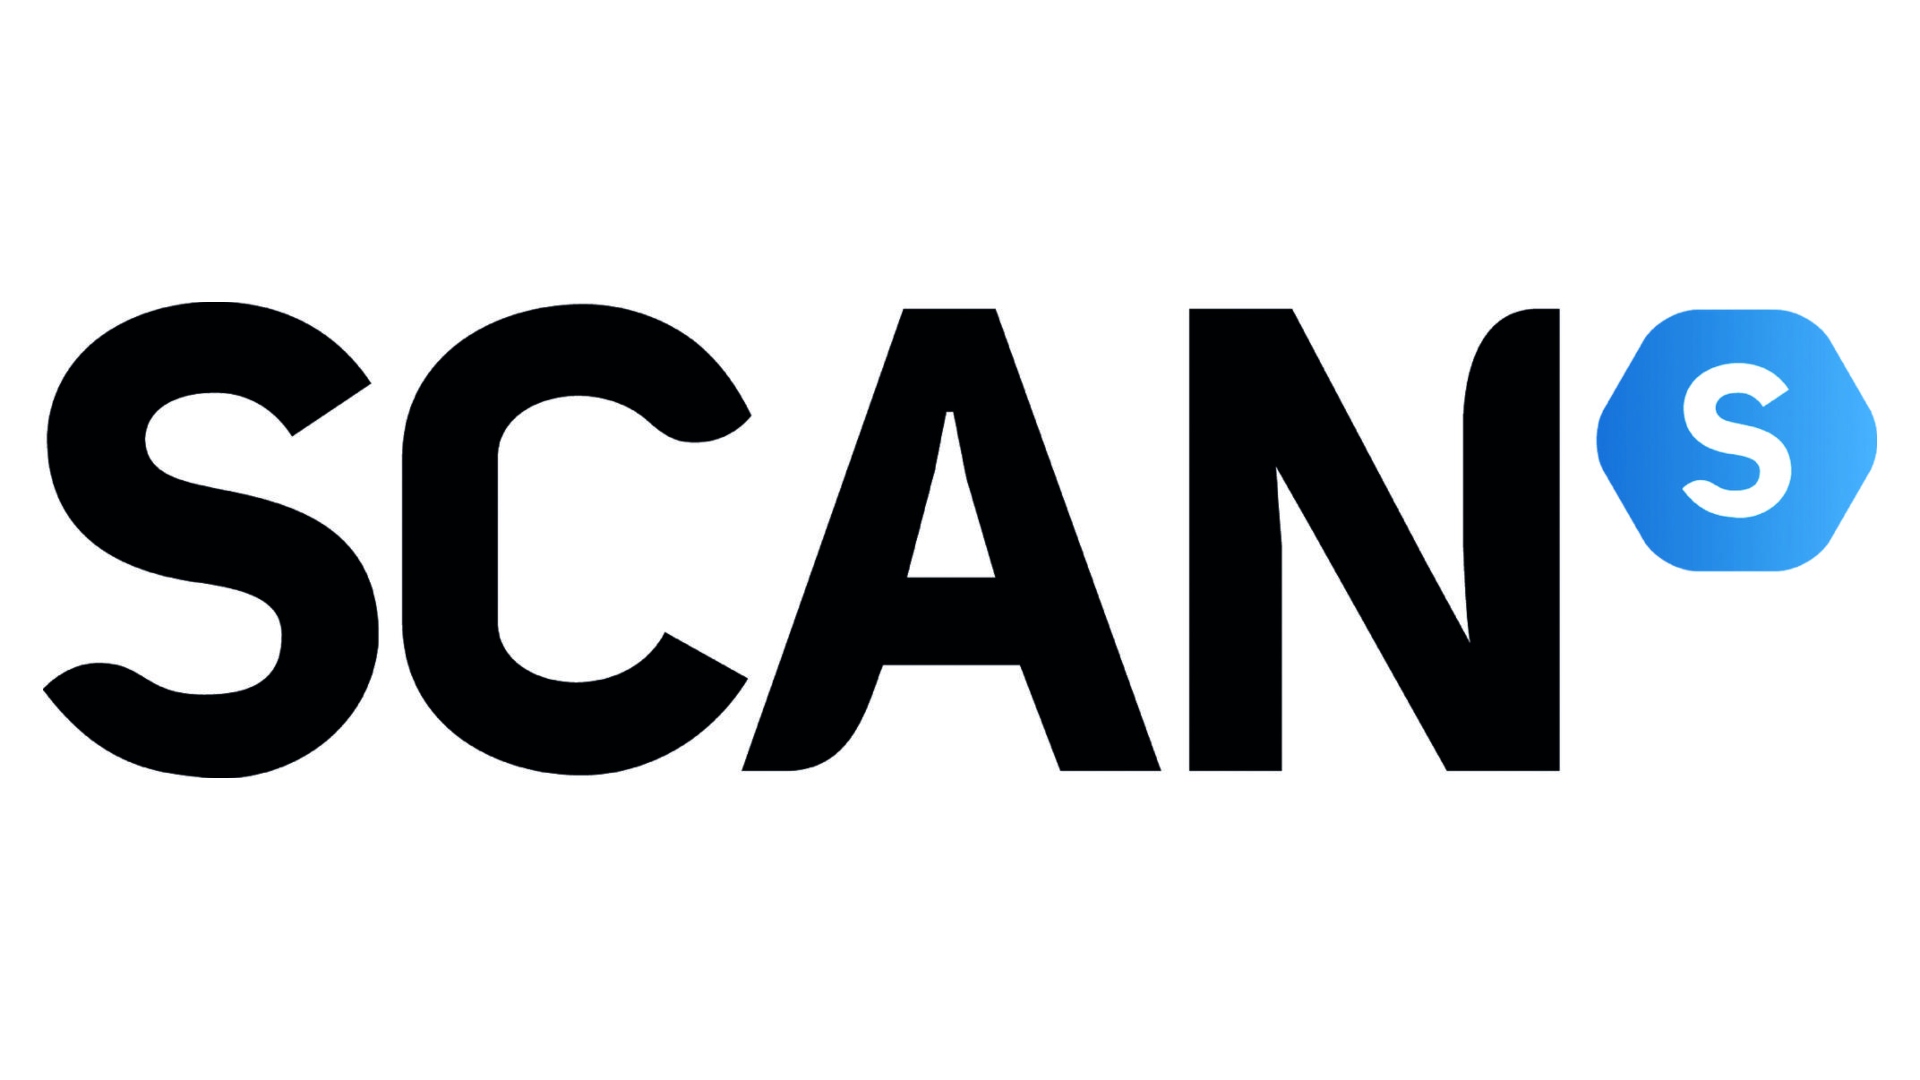 Best websites for custom PC builds, number 4: Scan UK. Its logo is on a white background.